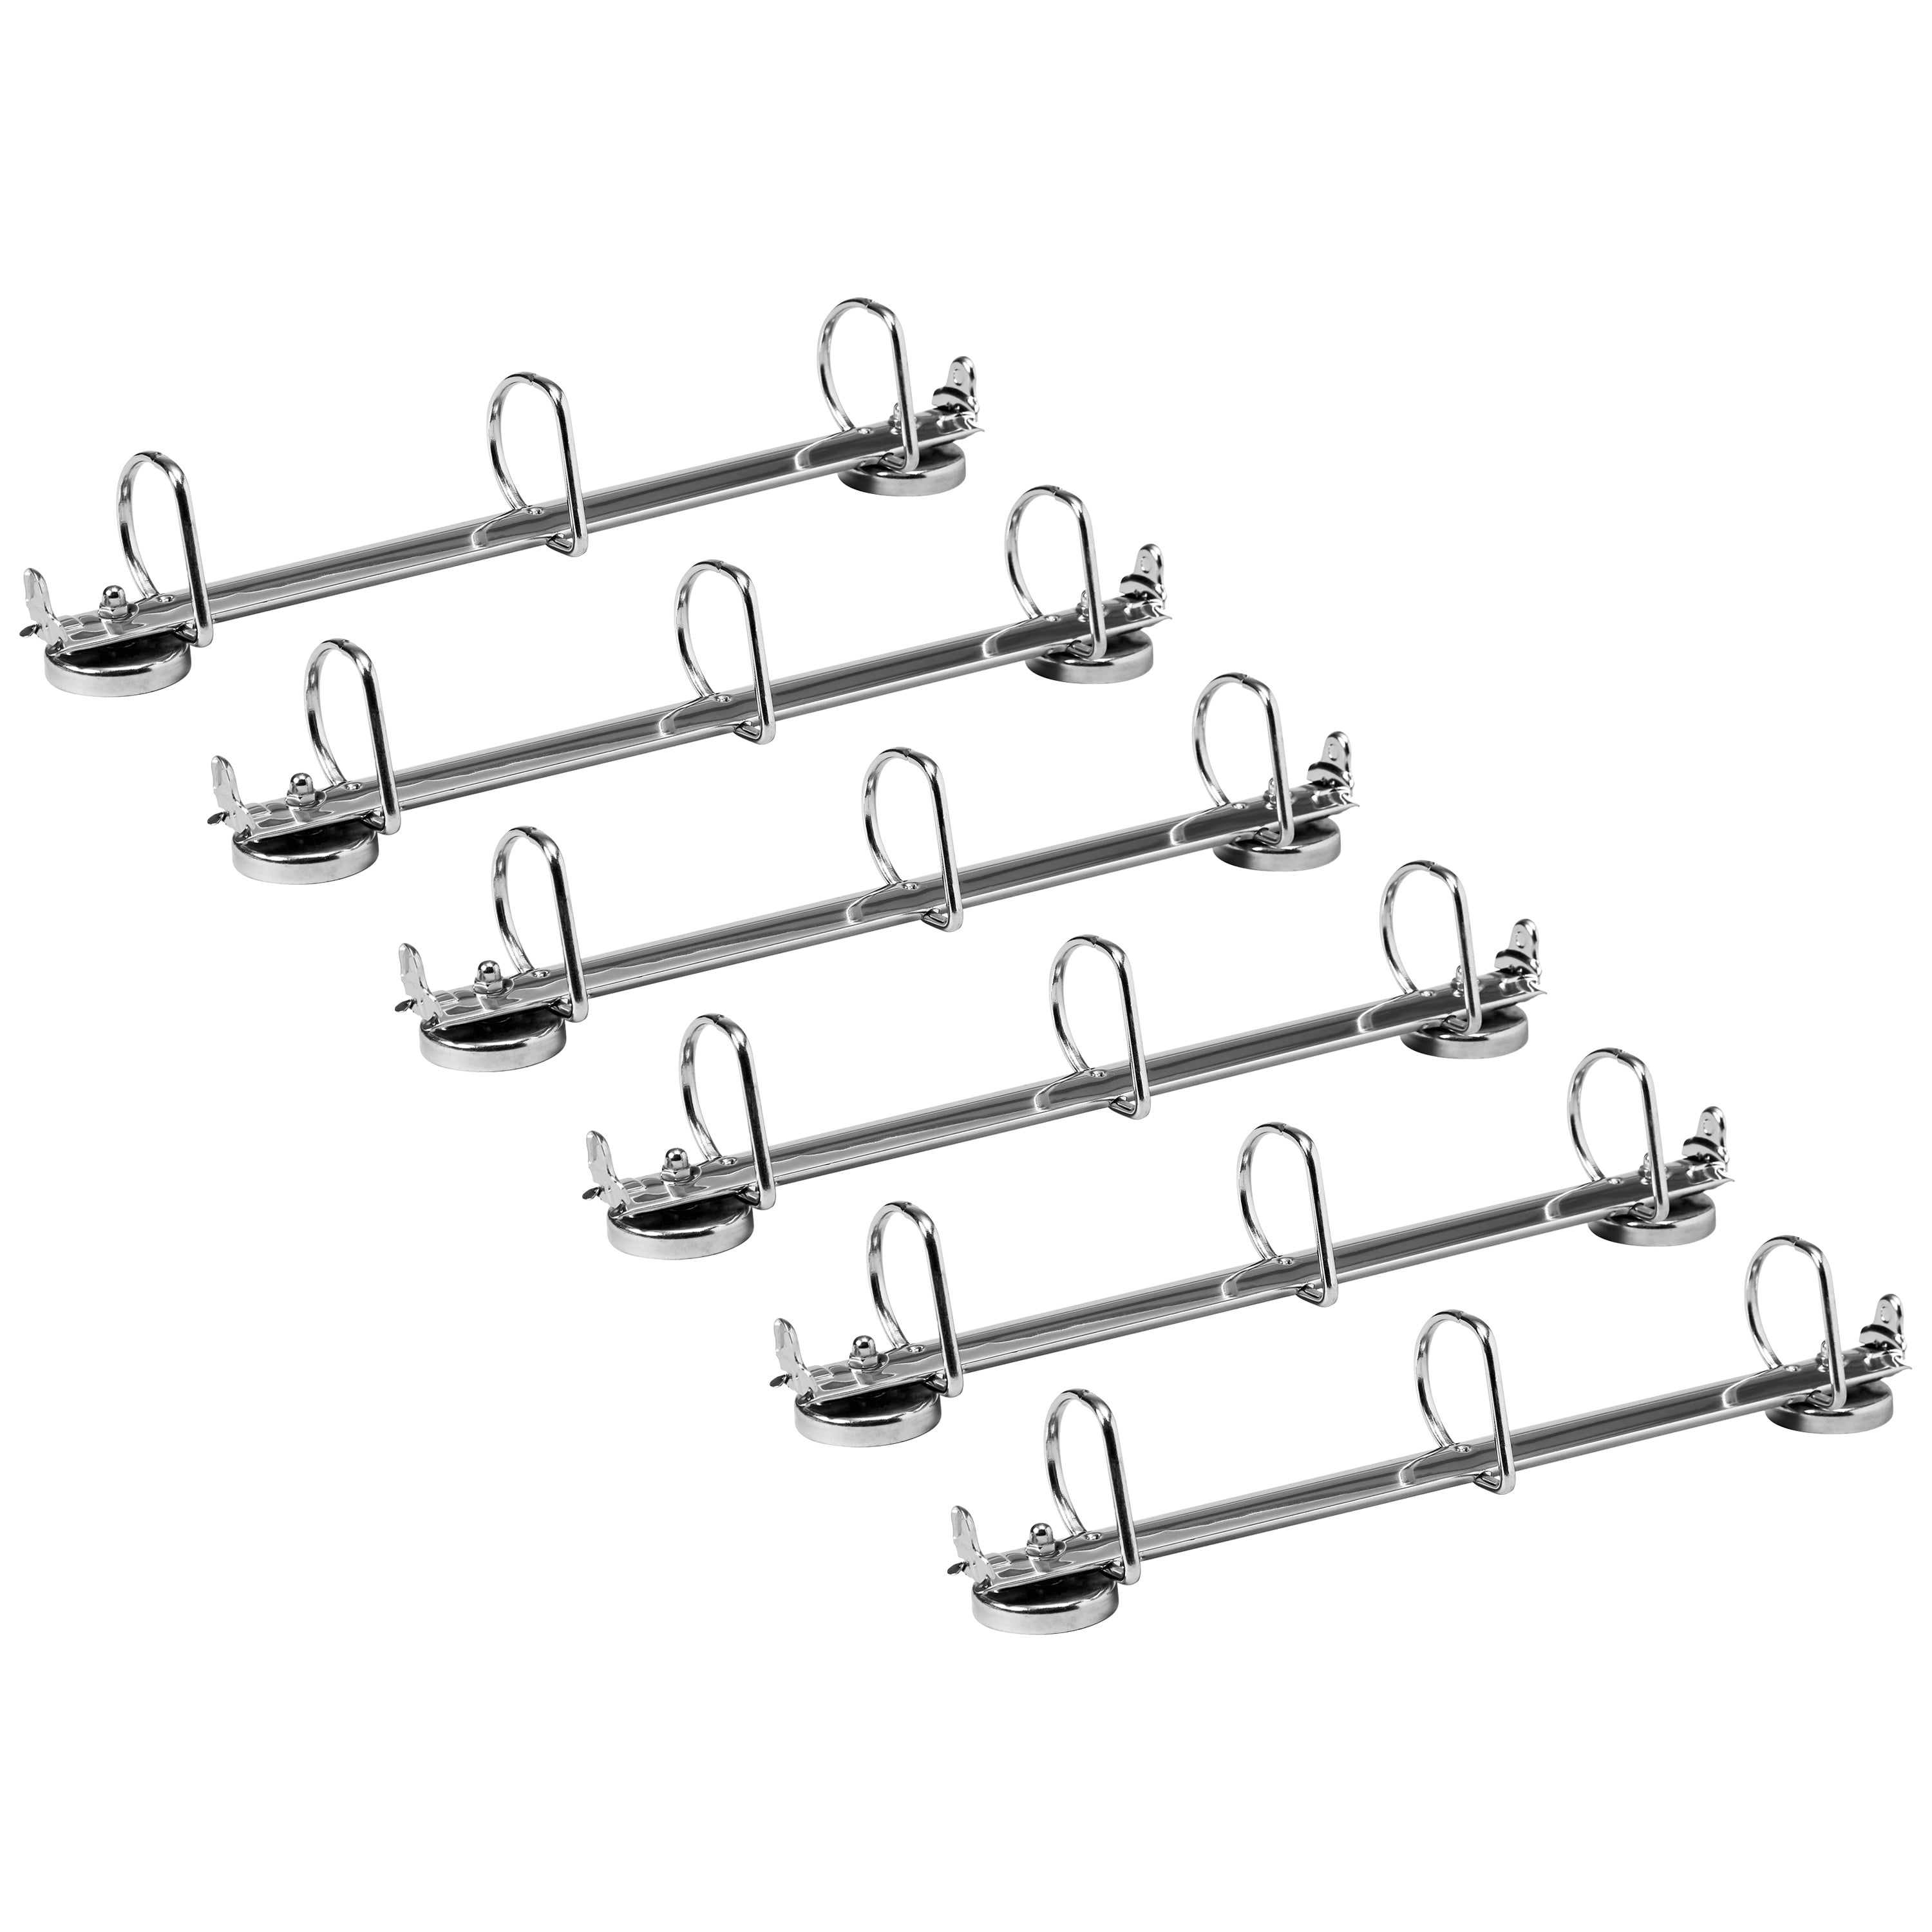 Amazon.com : BUYGOO 75Pcs Binder Rings, Loose Leaf Binder Ring Assorted  Sizes 1, 1.25,1.5, 2 Inch Book Binder Rings with 1 Hole Punch Ring Binder  Clips, Metal Rings for Index Cards, Flash